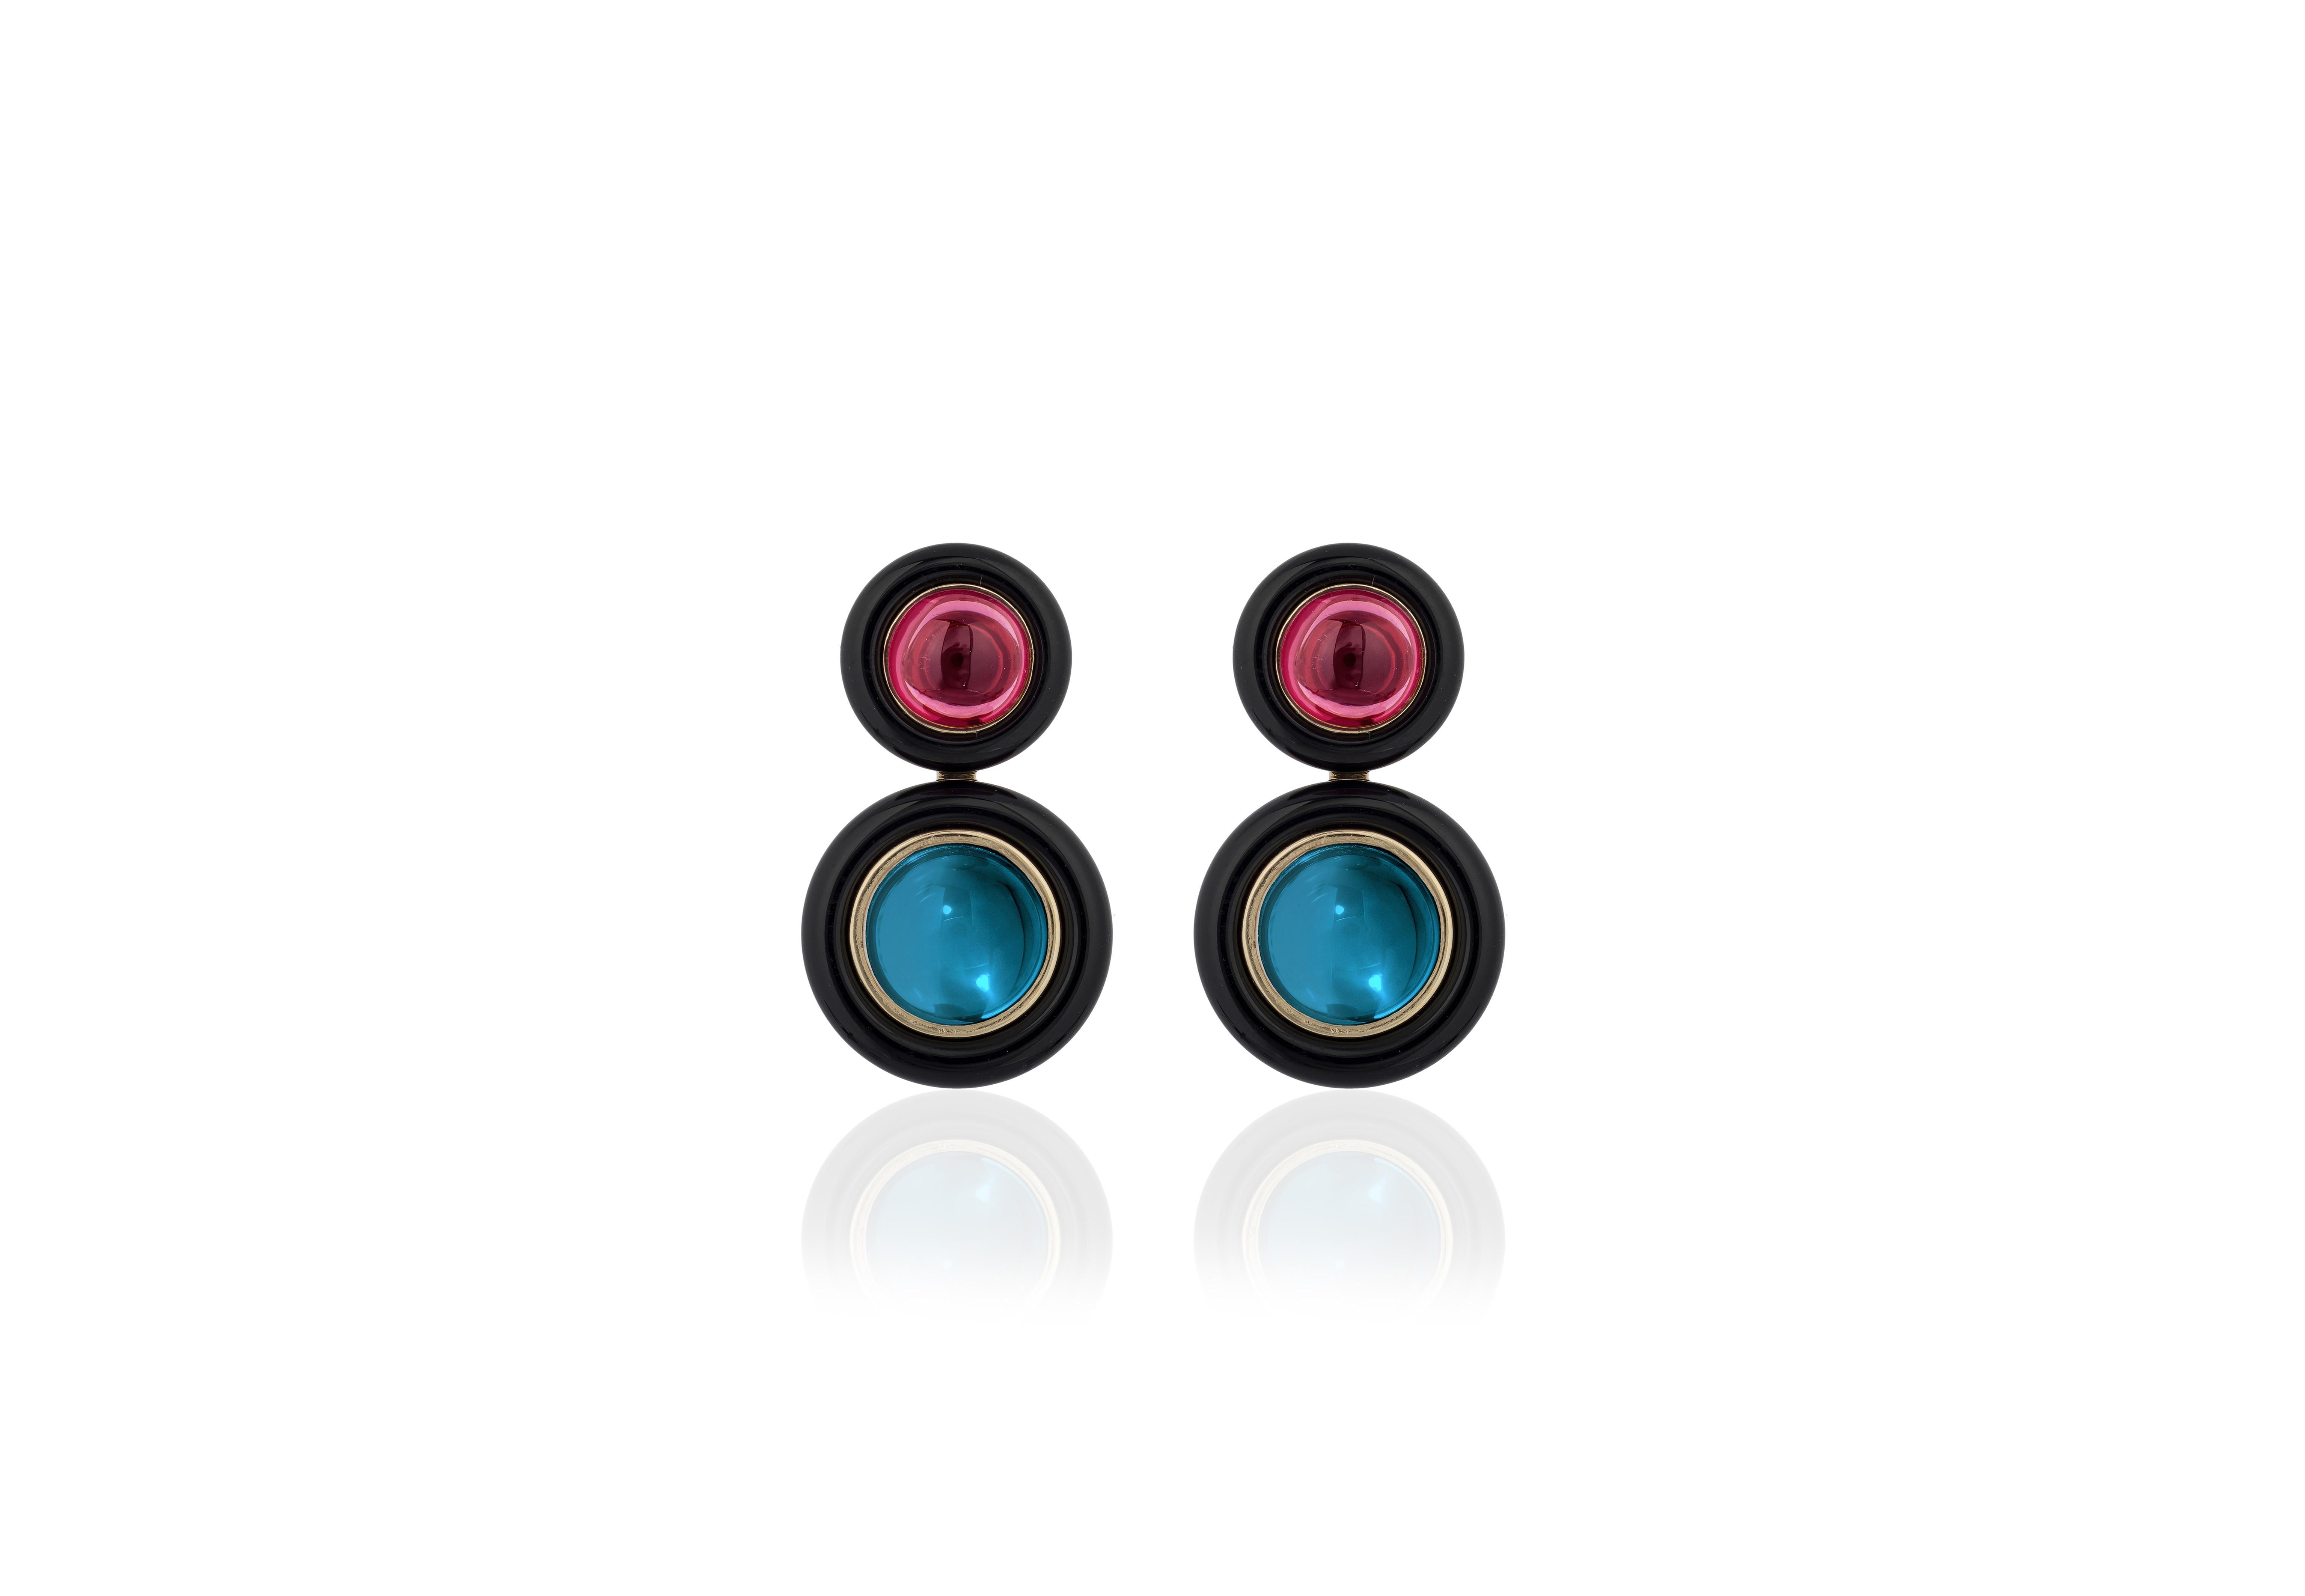 Garnet and London Blue Topaz Cabochon Earrings with Onyx ring Surround in 18K Yellow Gold, from 'Limited Edition' Collection. These limited edition items are just that! Limited! 

Feel the exclusiveness in every piece from this collection and Feel